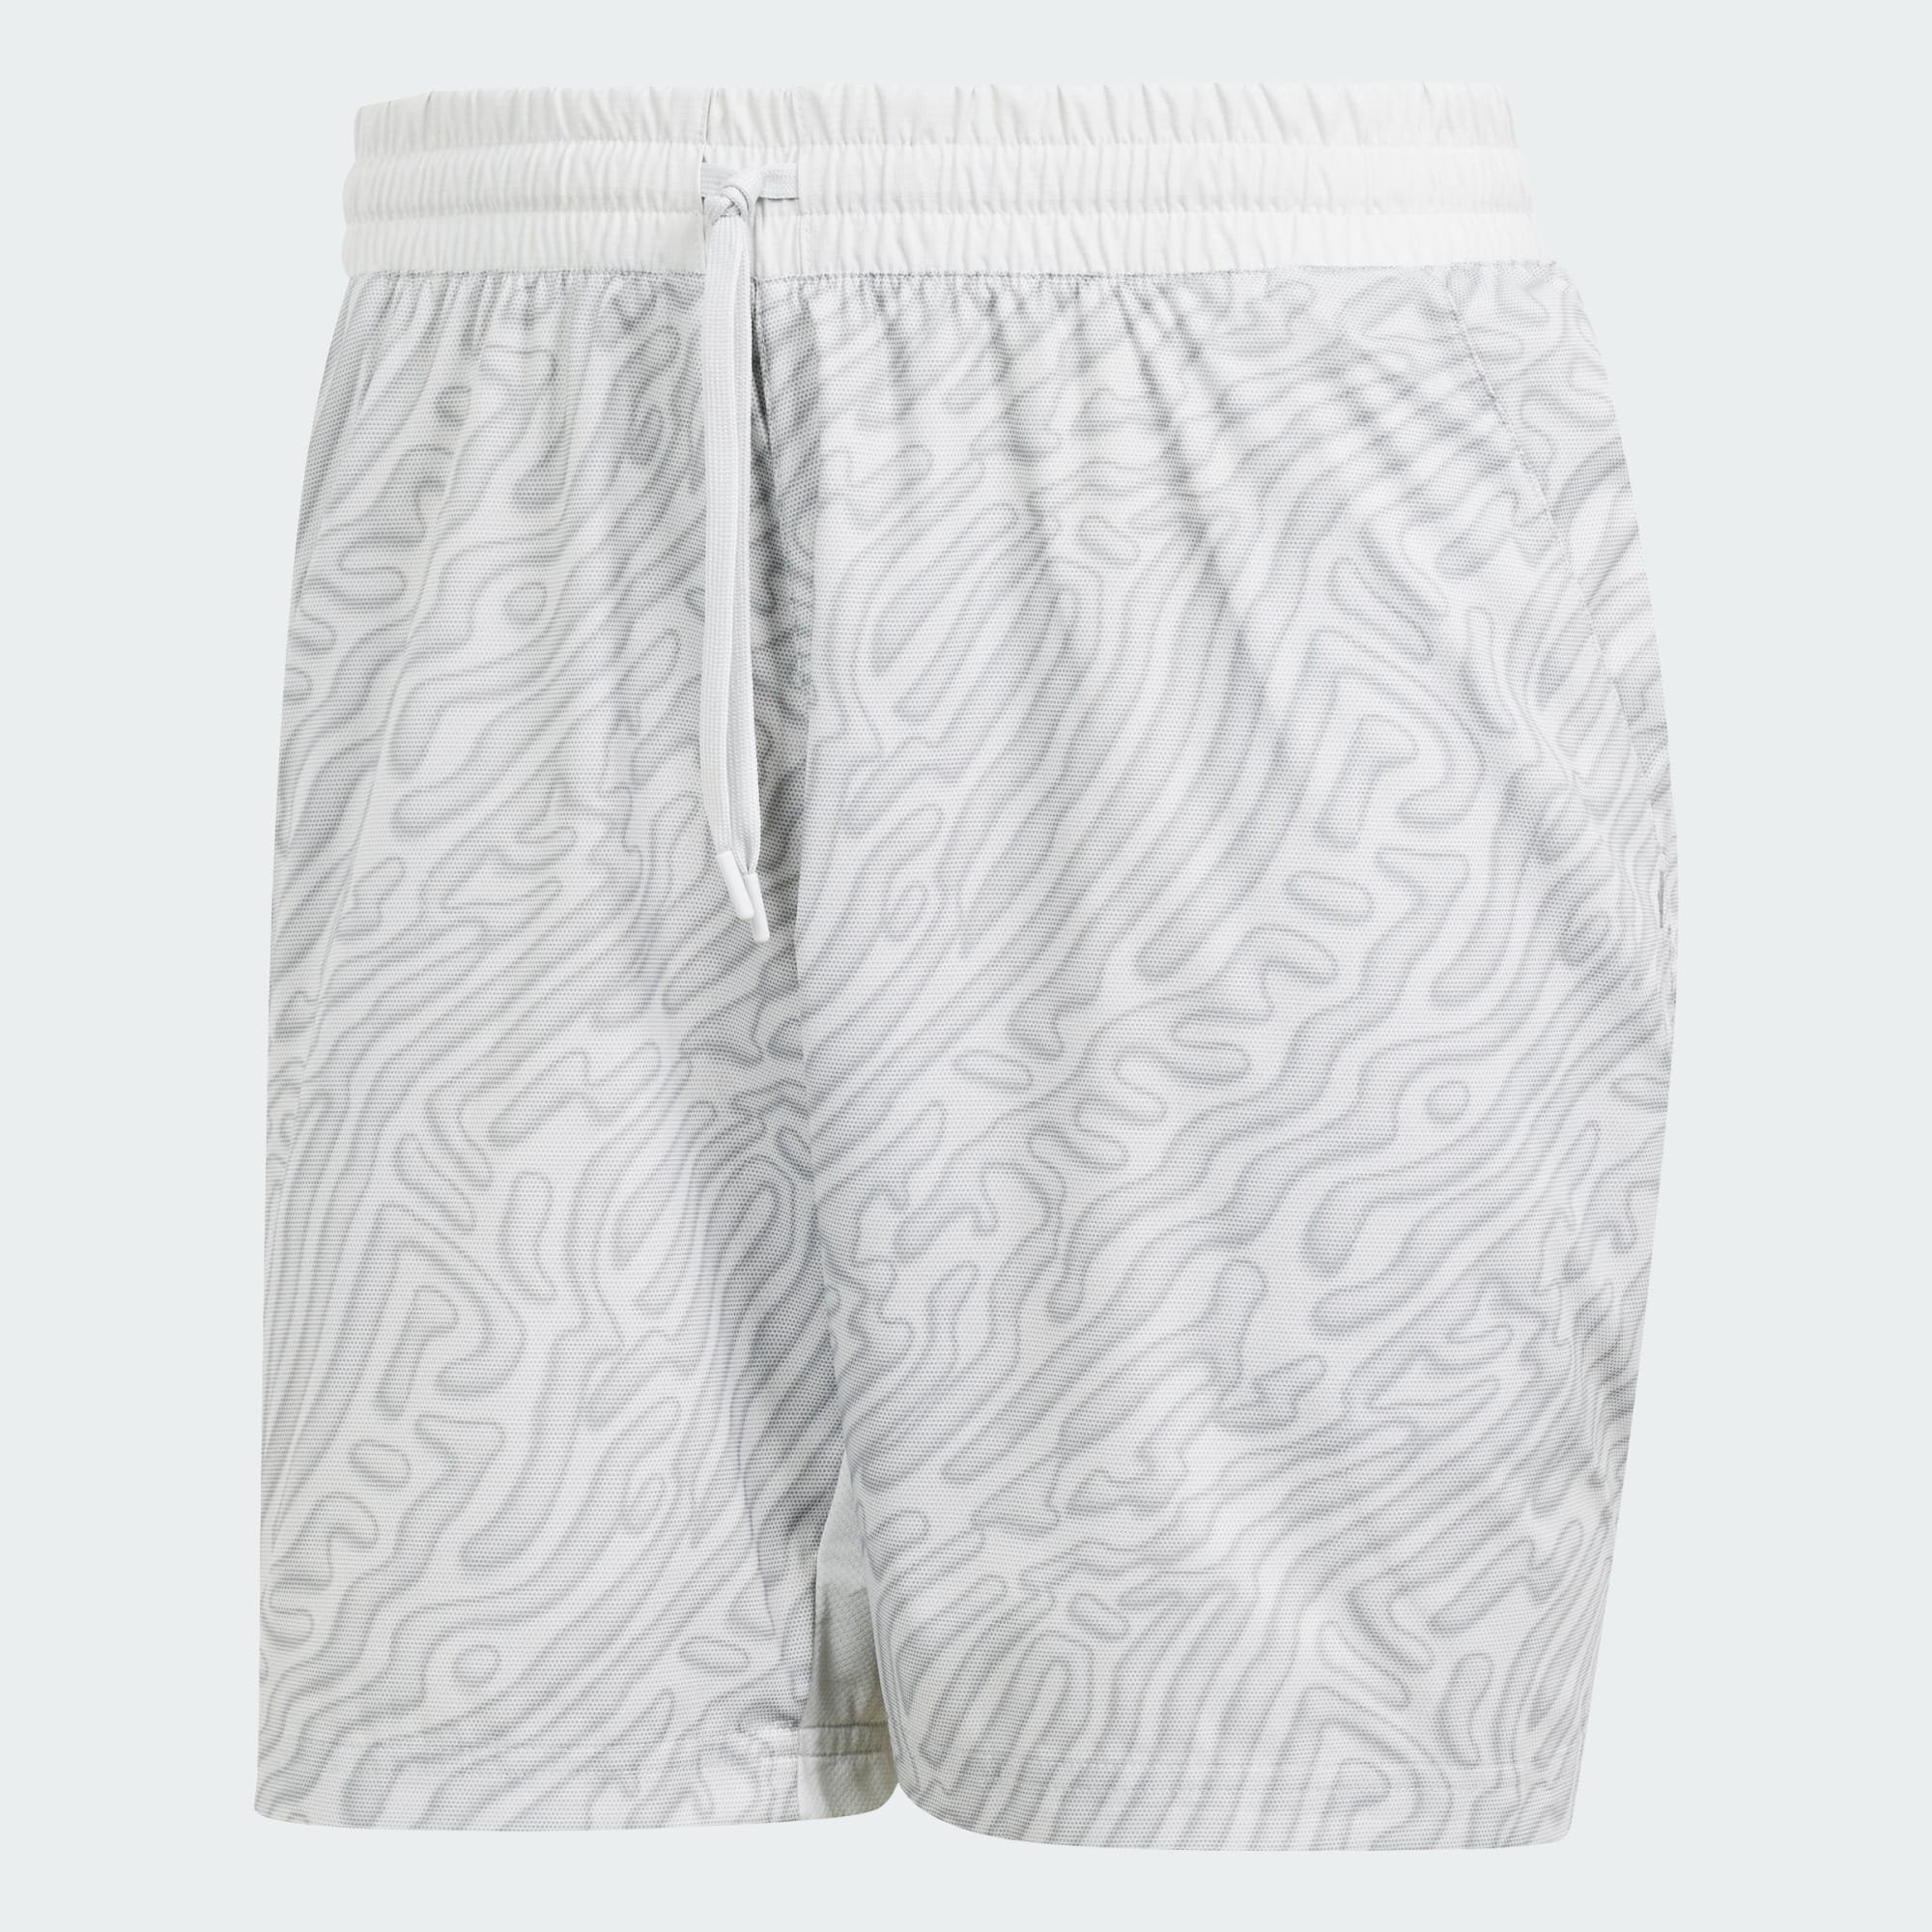 / Funktionsshorts Solid PRO adidas TENNIS PRINTED HEAT.RDY Charcoal Performance Grey SHORTS One 7-INCH Grey ERGO